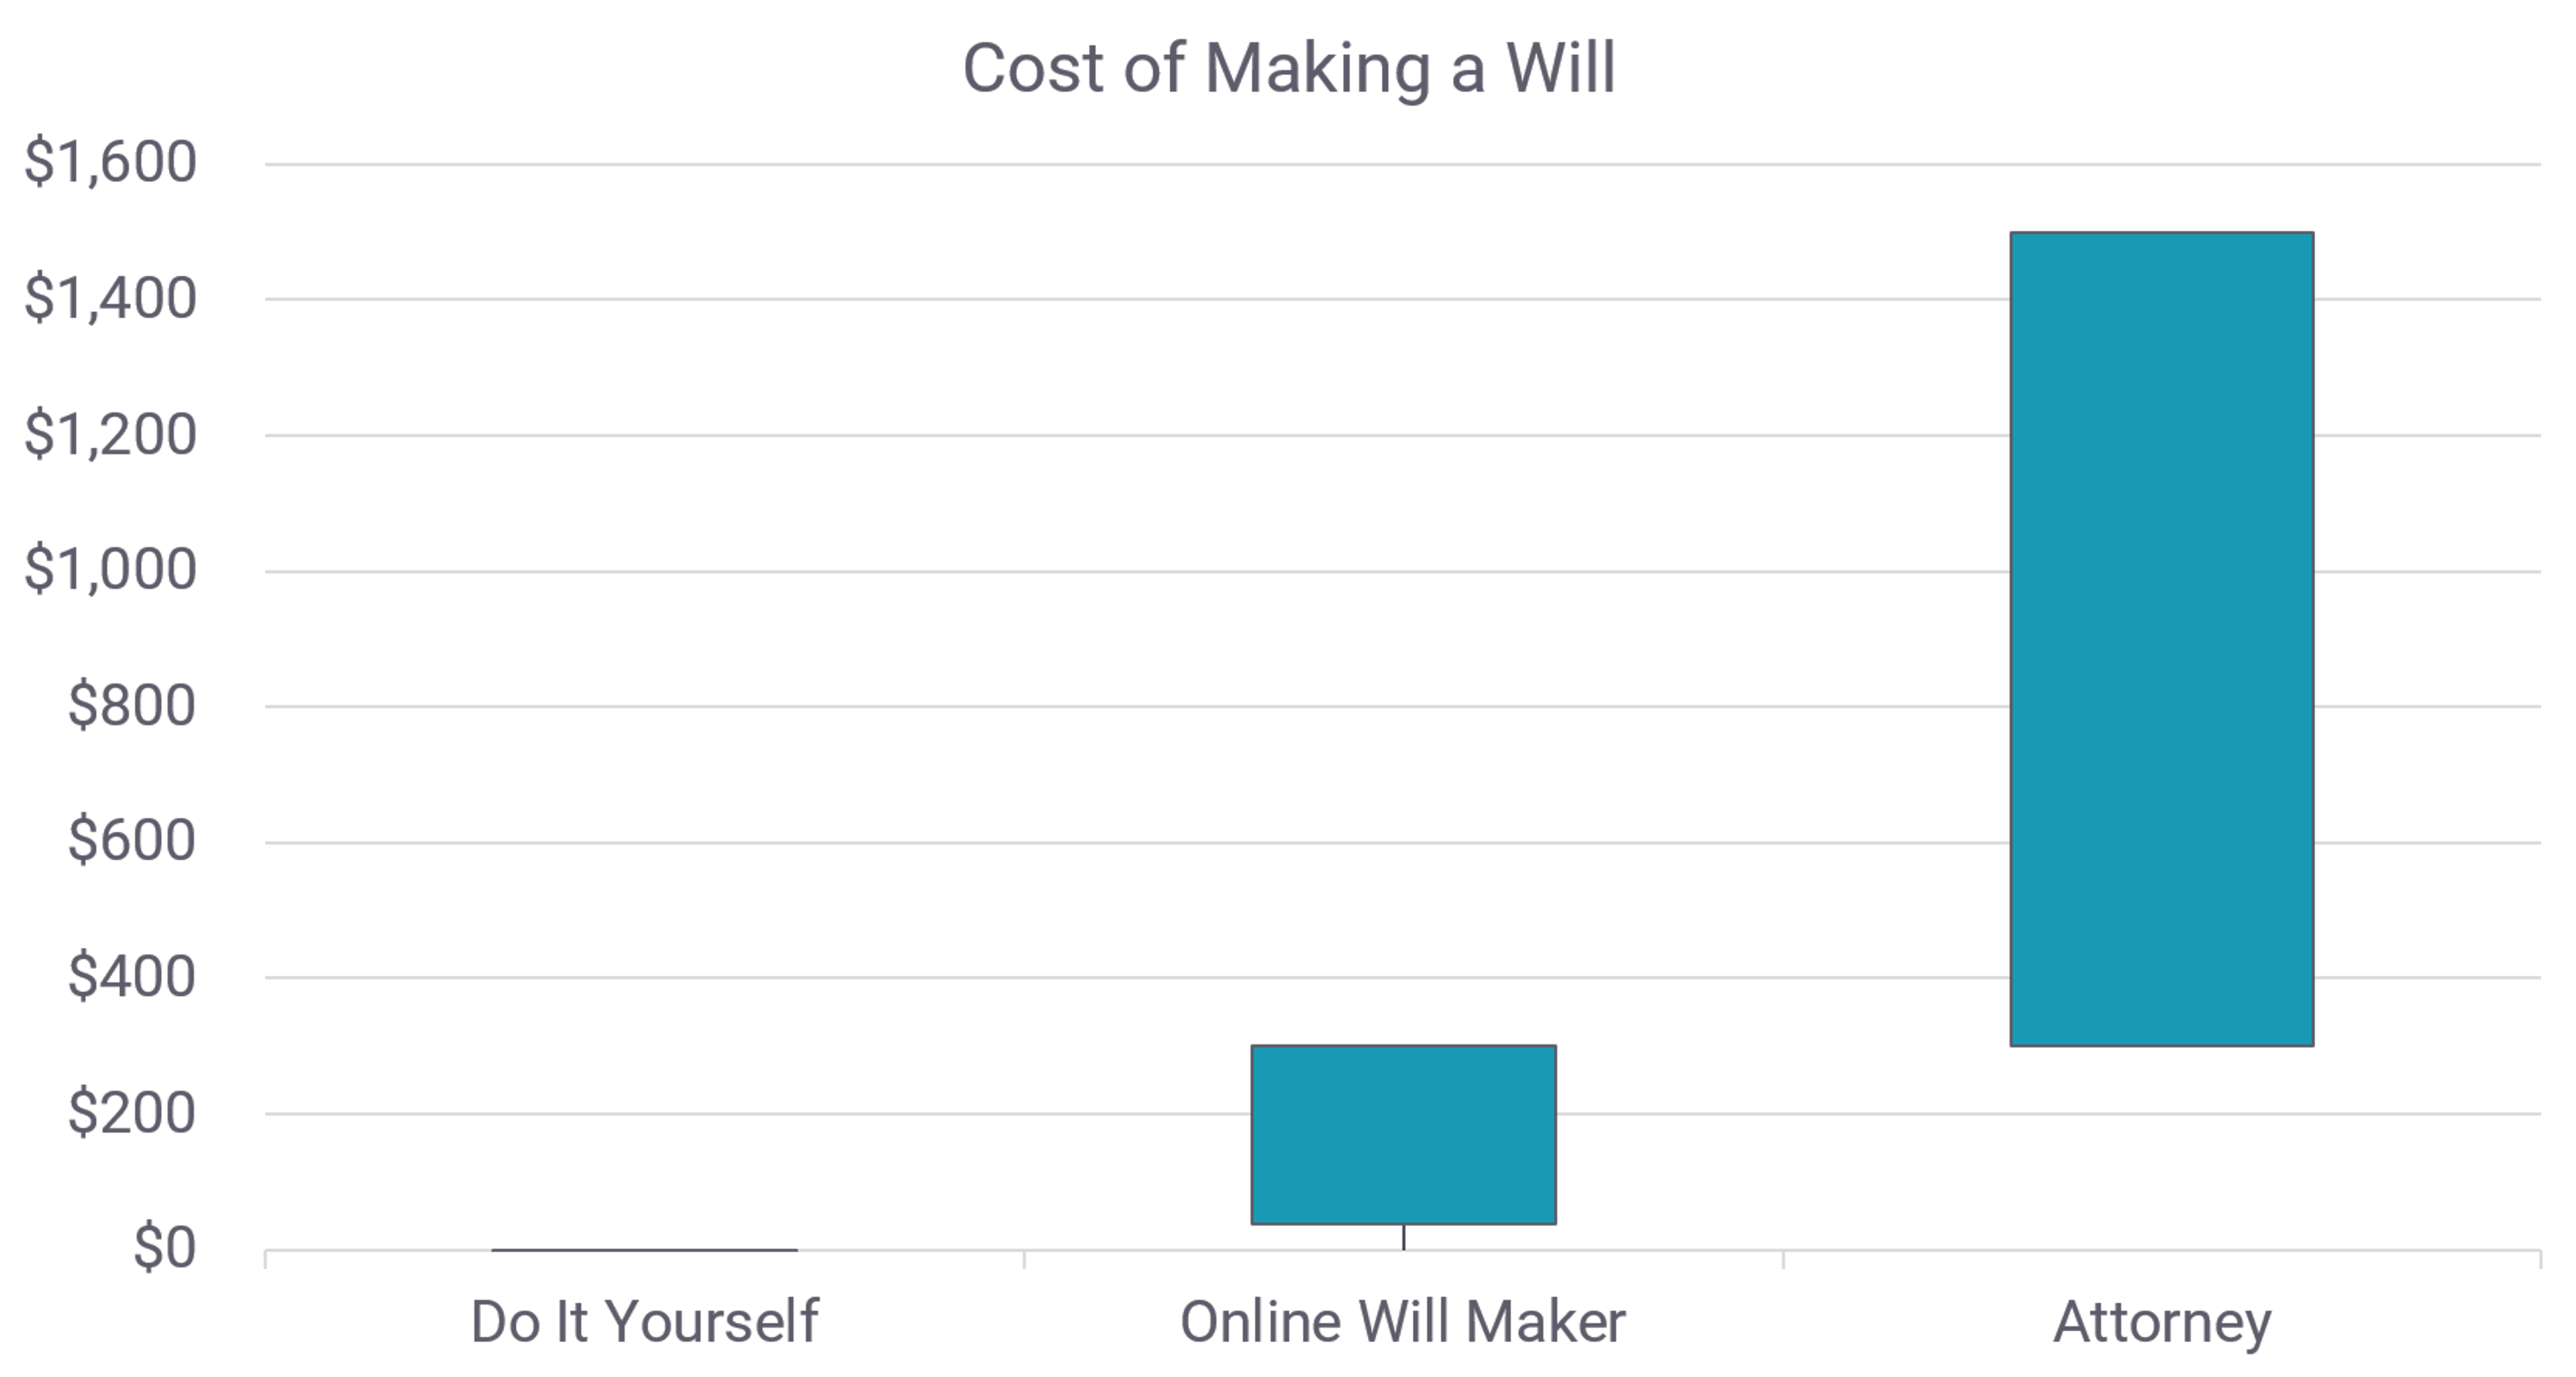 bar graph showing cost of making a will under various options